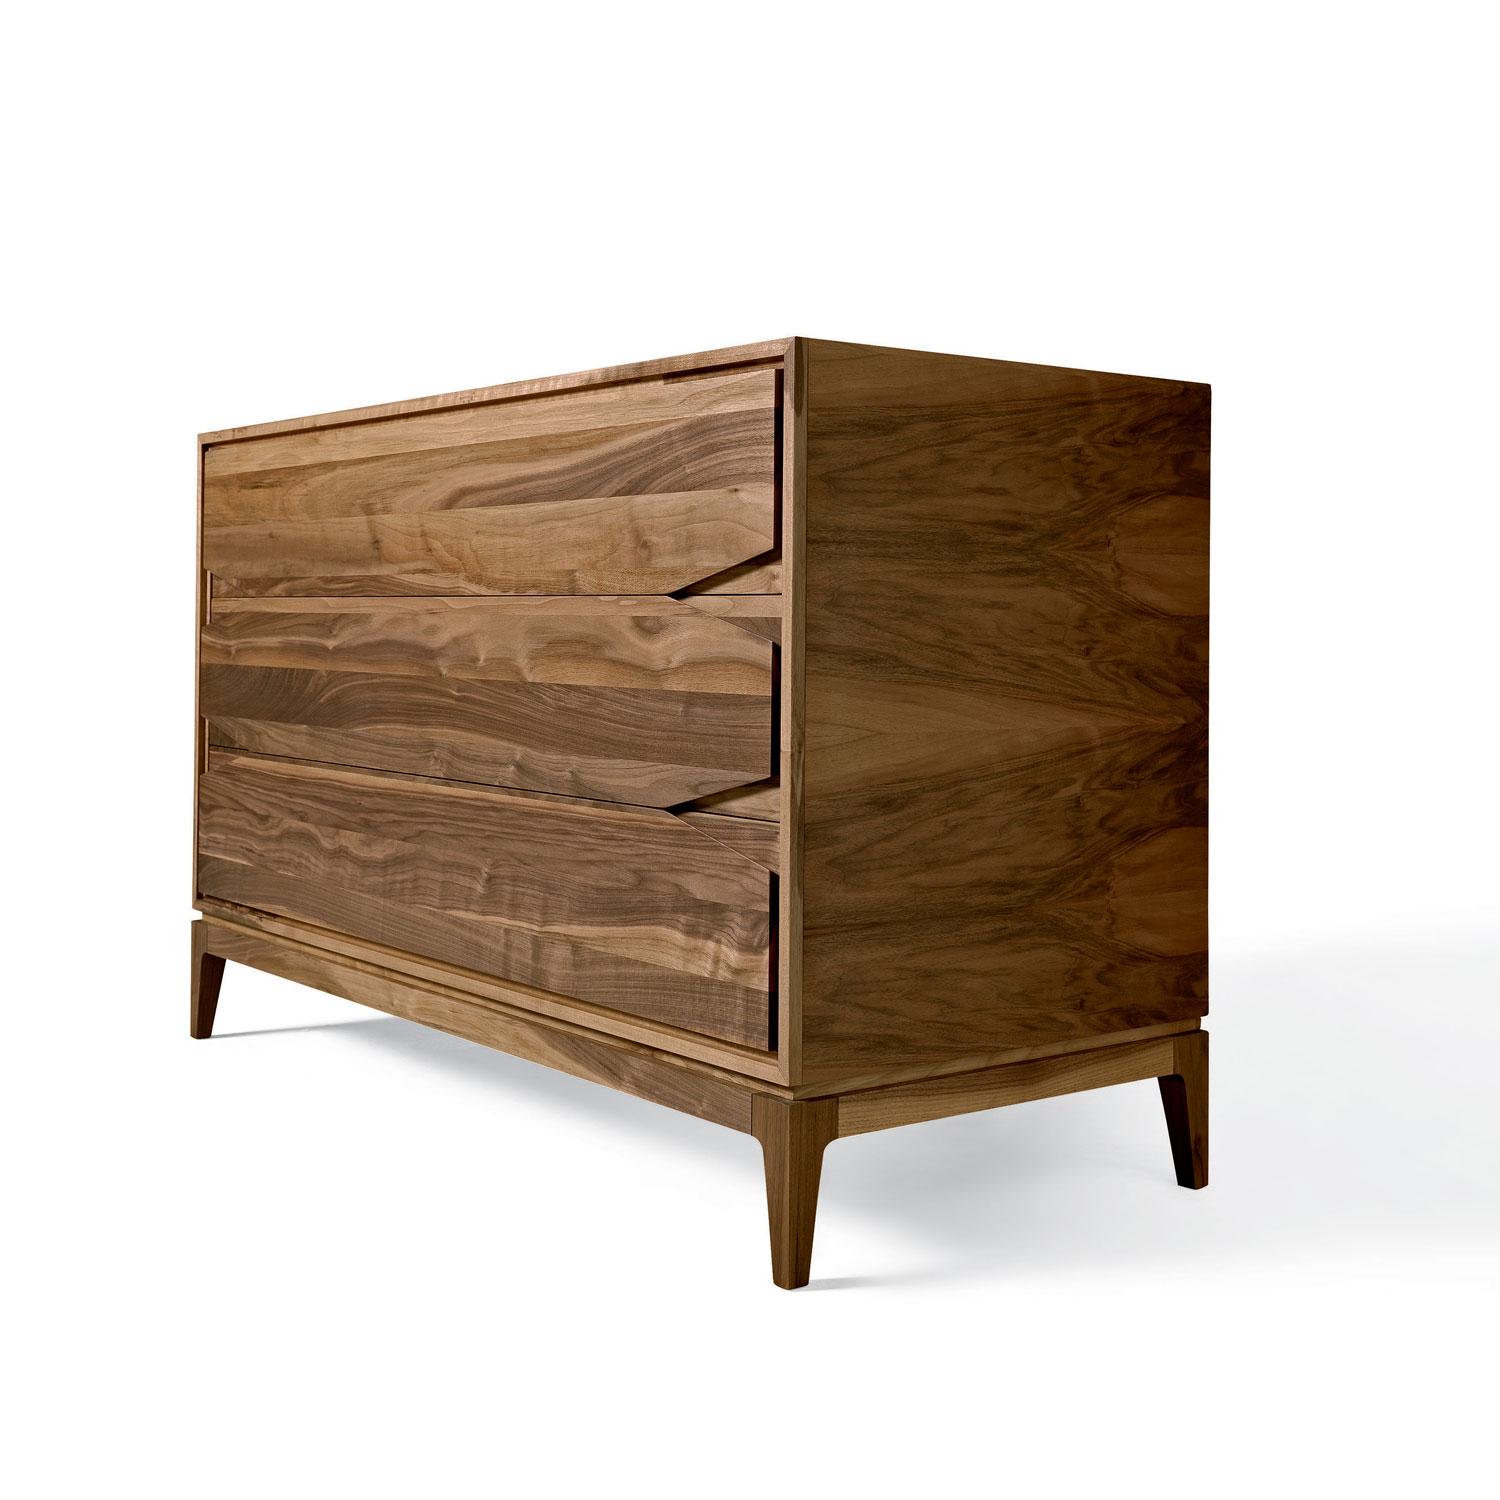 A high-end contemporary dresser crafted by expert hands in Italy with premium solid walnut, oil finish. A sturdy and durable design piece that will live thru out many generations to come. The dresser comes with three drawers with the internal in